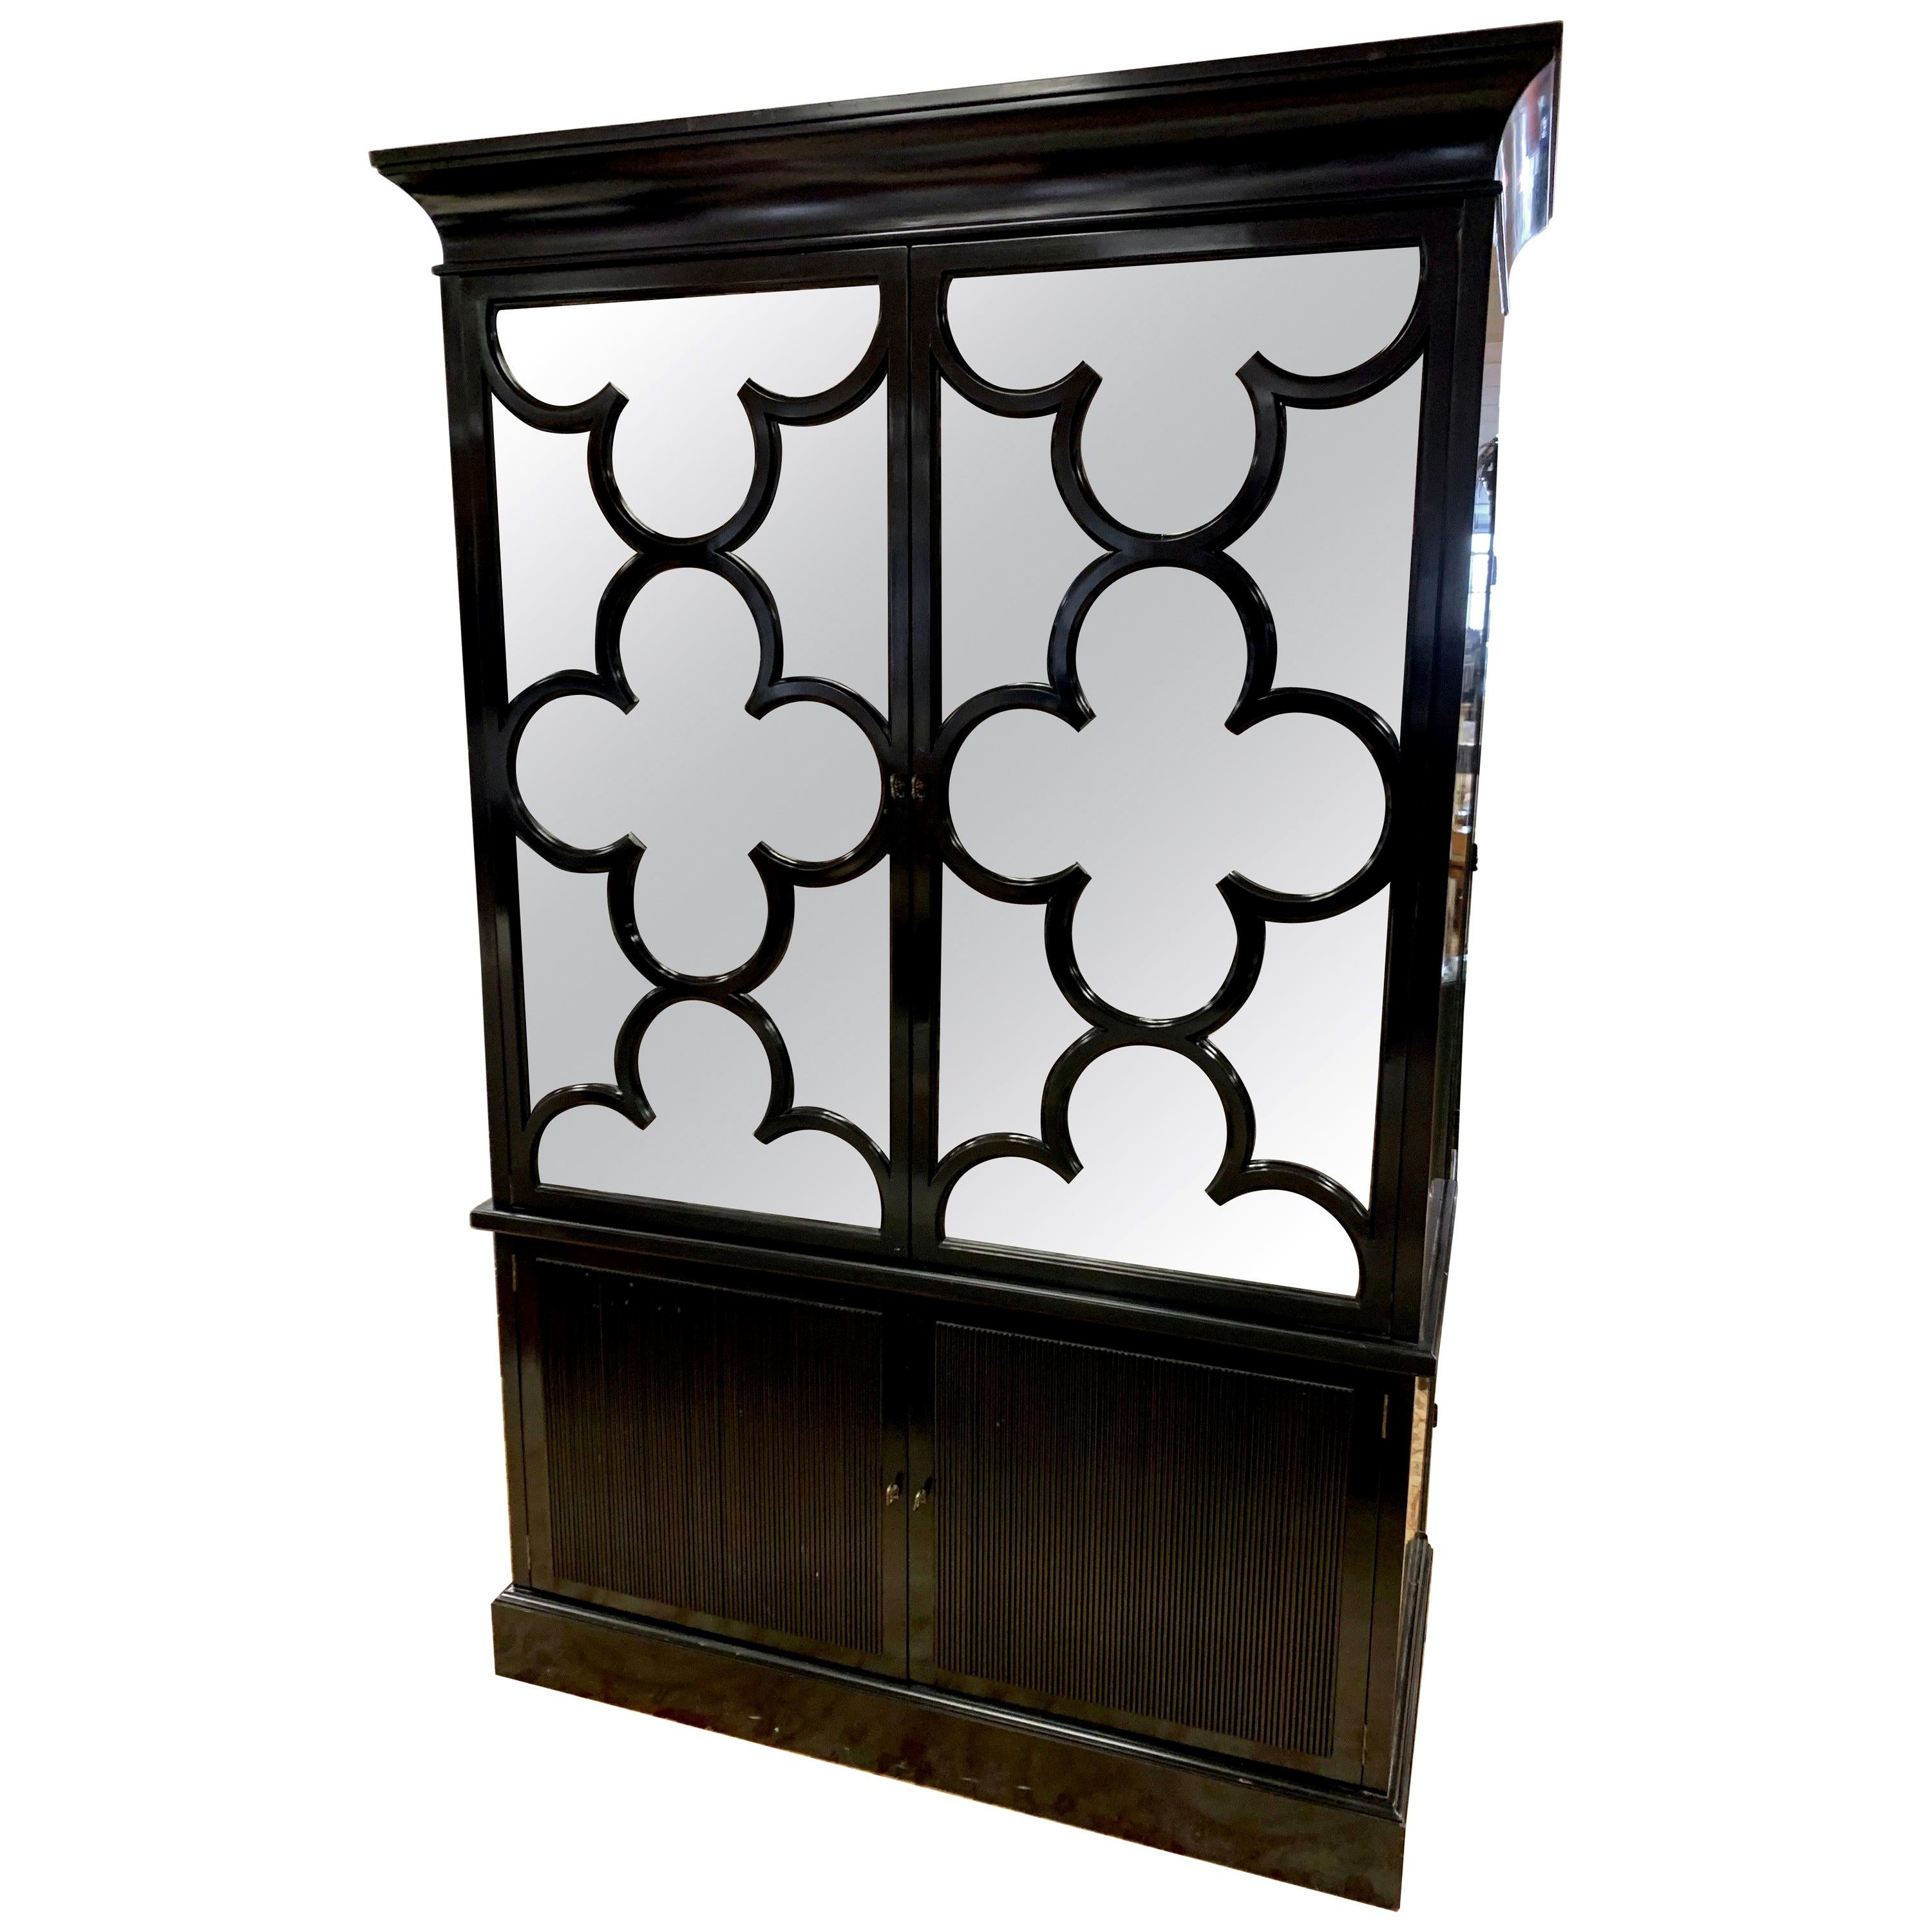 Barbara Barry Baker Furniture Black Lacquered Mirrored Wardrobe Cabinet Armoire